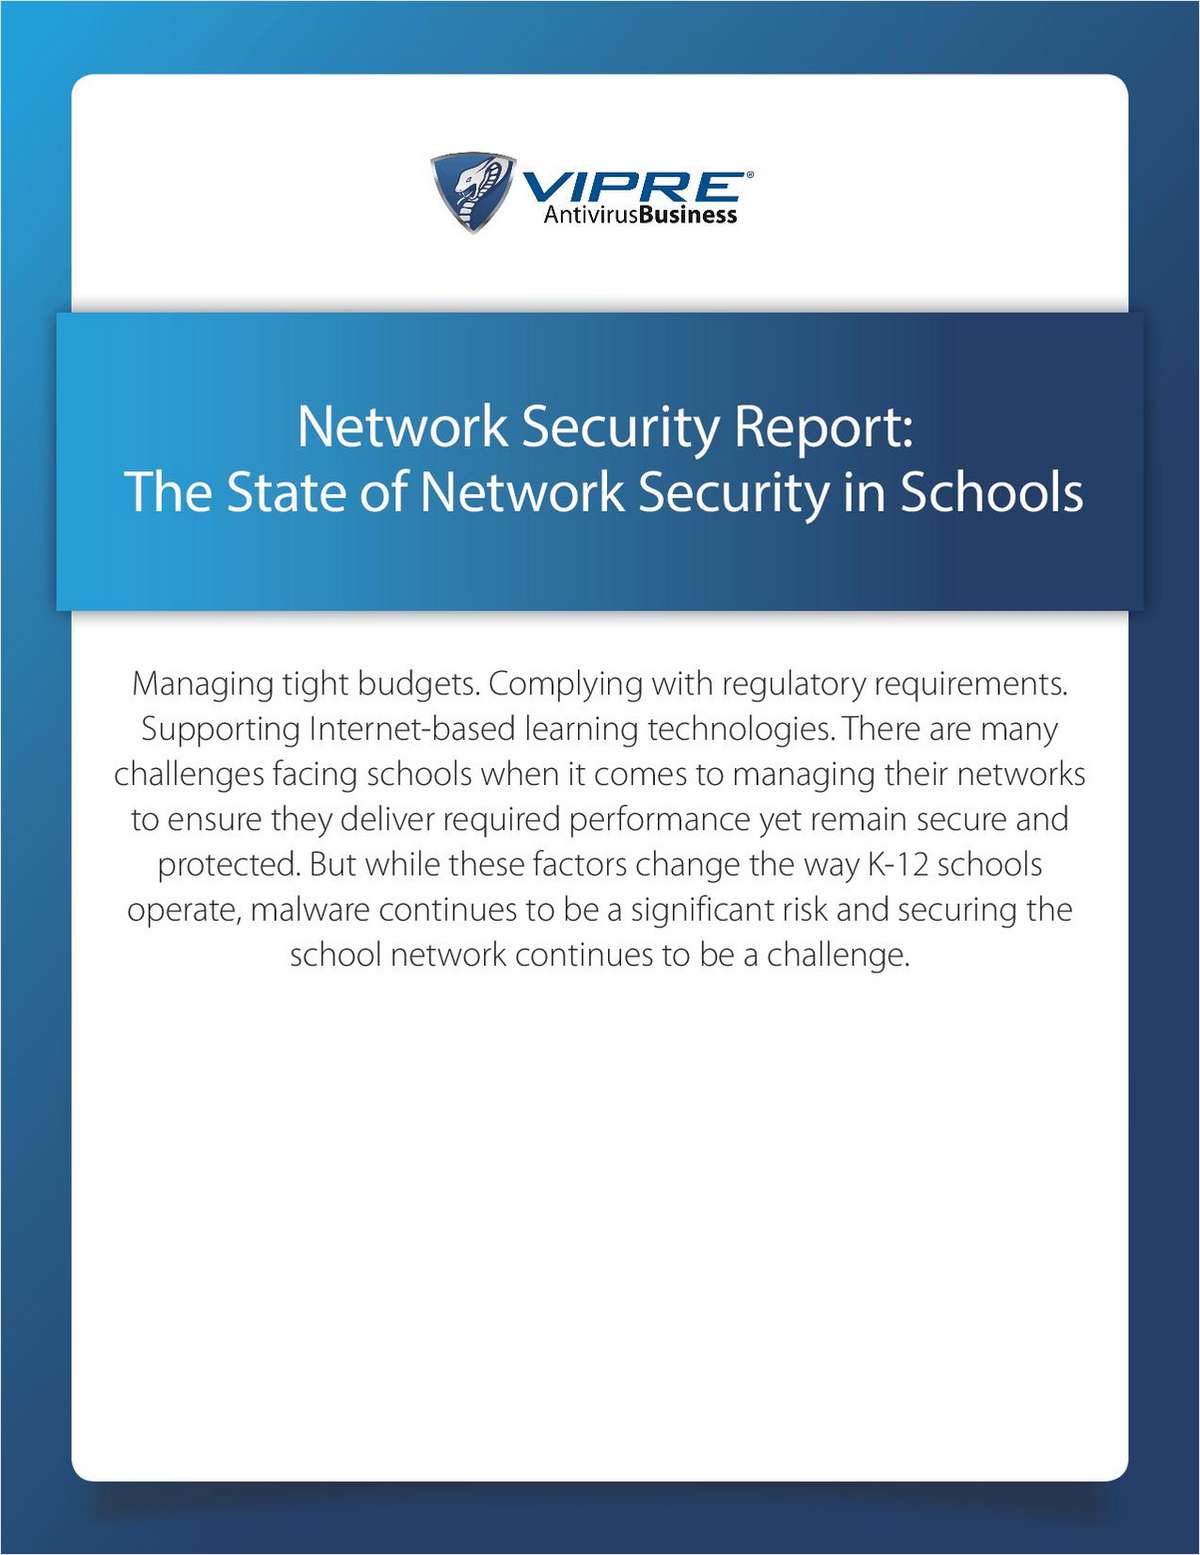 Network Security Report: The State of Network Security in Schools